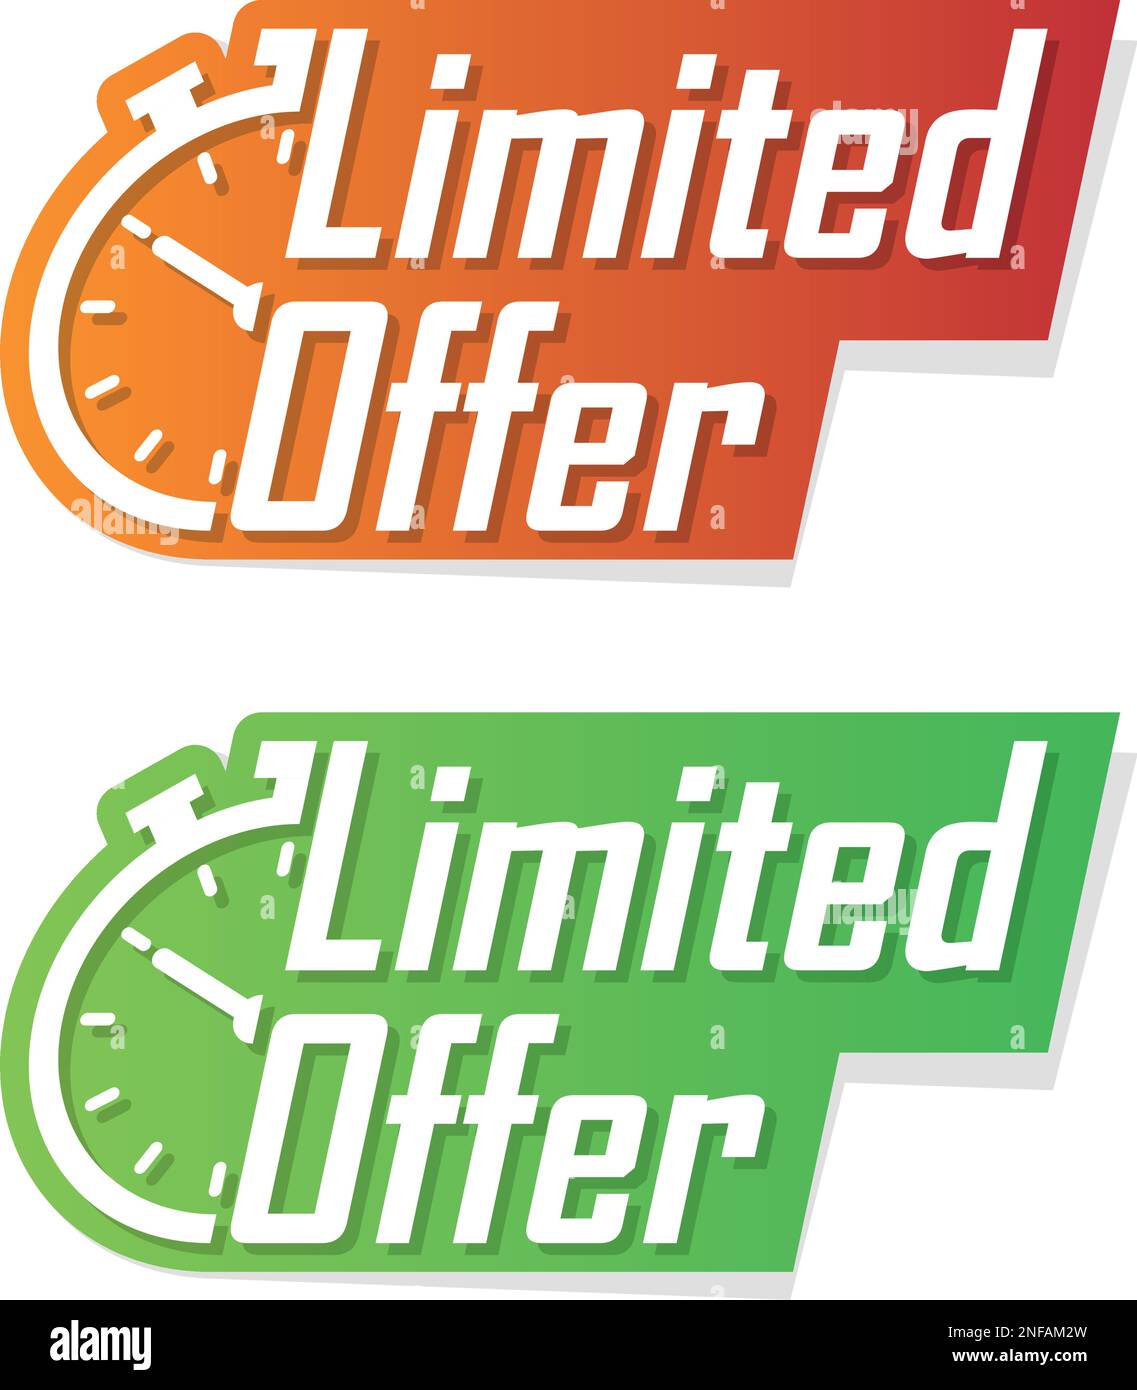 https://c8.alamy.com/comp/2NFAM2W/limited-offer-icon-in-flat-style-promo-label-with-alarm-clock-vector-illustration-on-isolated-background-last-minute-chance-sign-business-concept-2NFAM2W.jpg